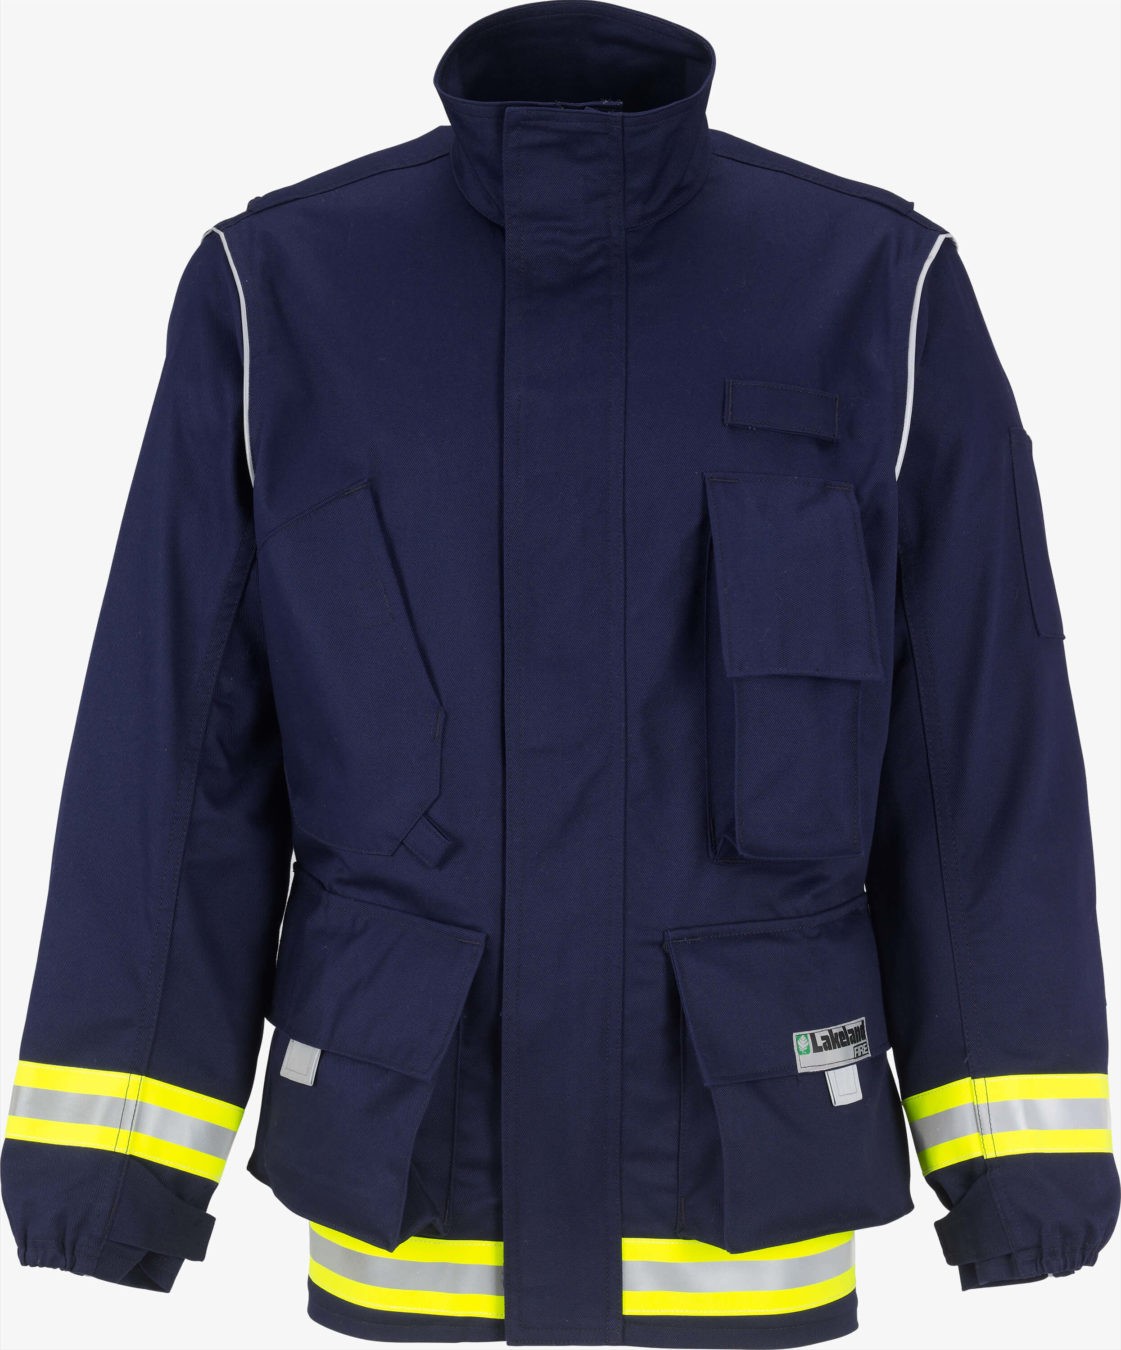 Lakeland 911 Series Extrication Coat Navy Blue Front View